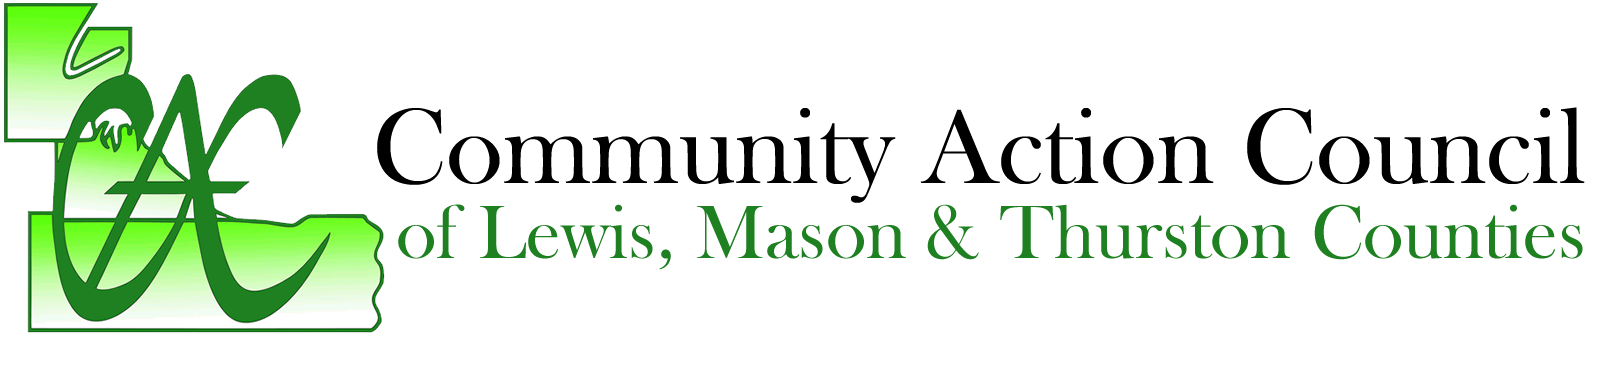 Community Action Council of Lewis, Mason, and Thurston Counties